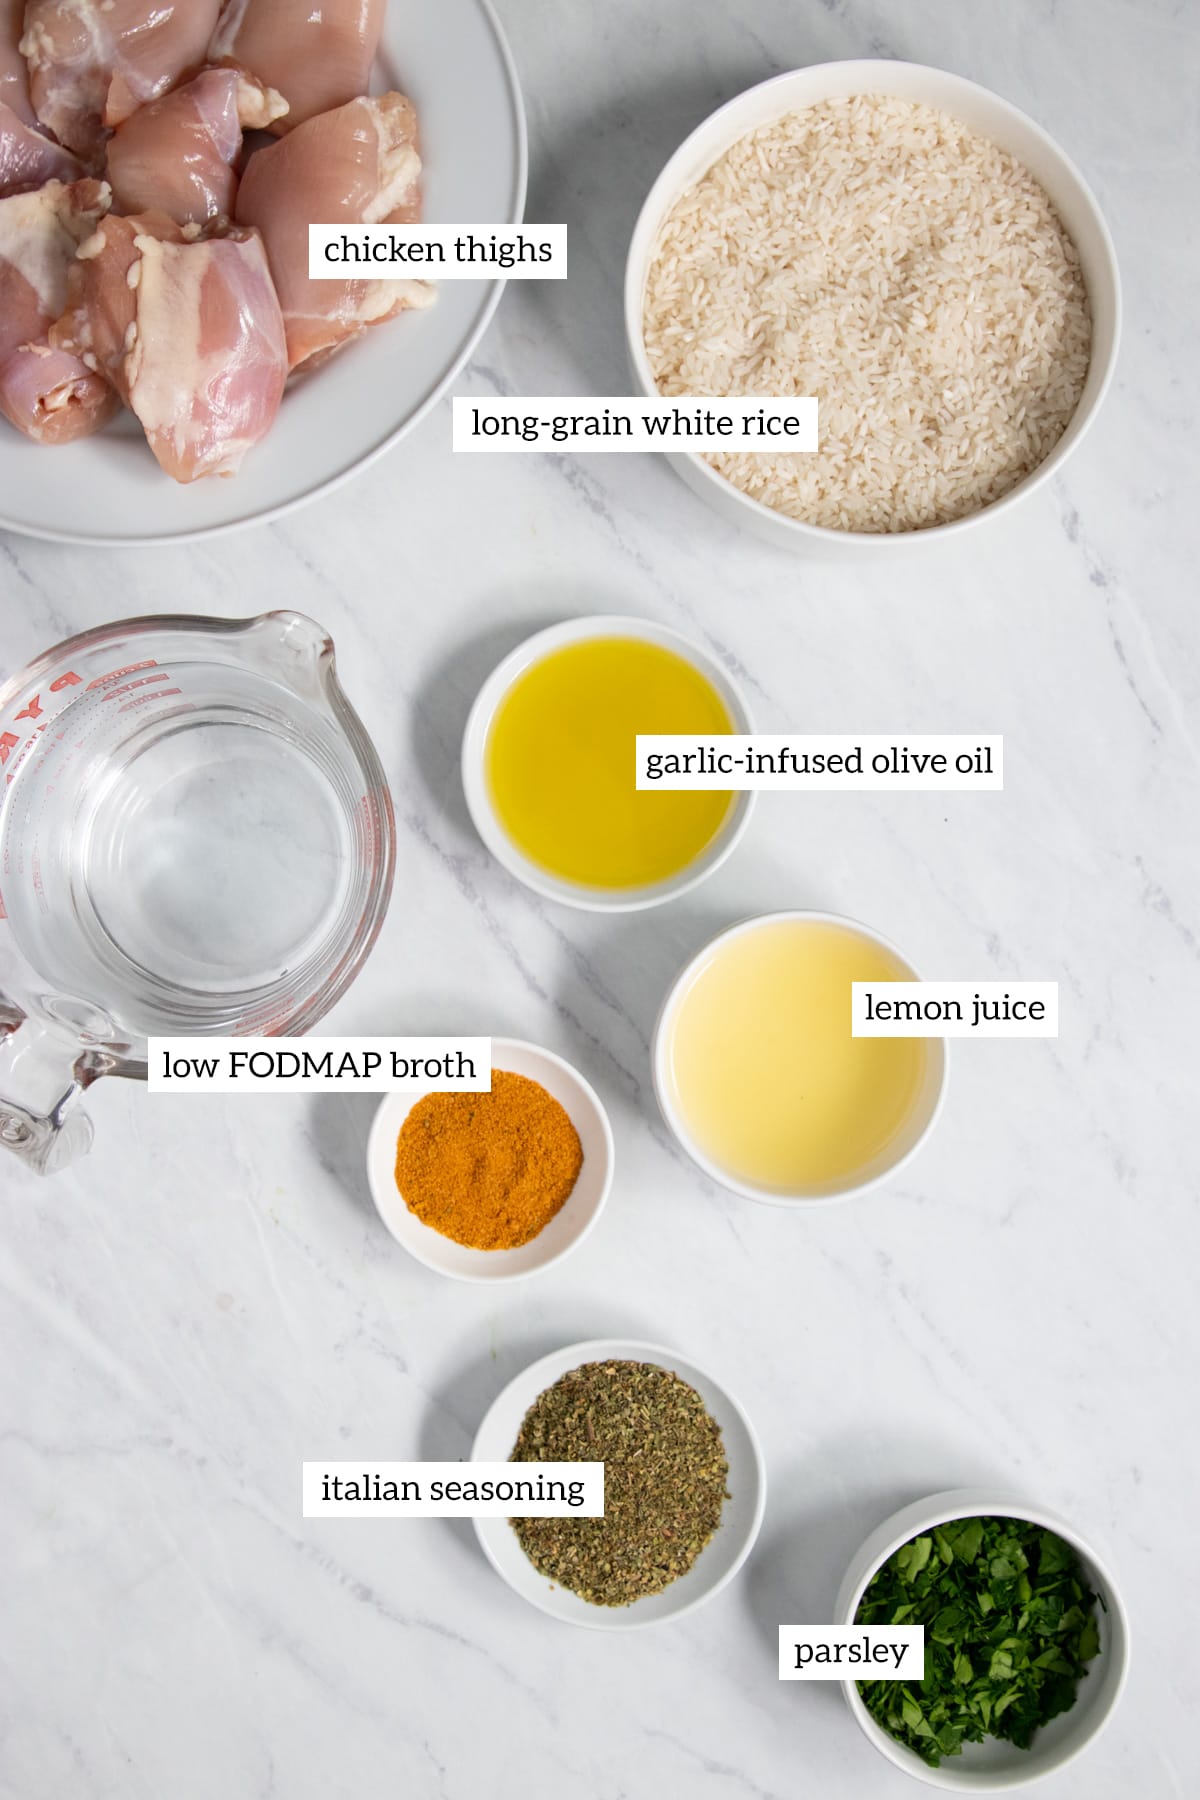 The ingredients needed for low FODMAP lemon chicken and rice are prepared and measured out into individual containers. Small text labels for each ingredient are layered on top of each container.